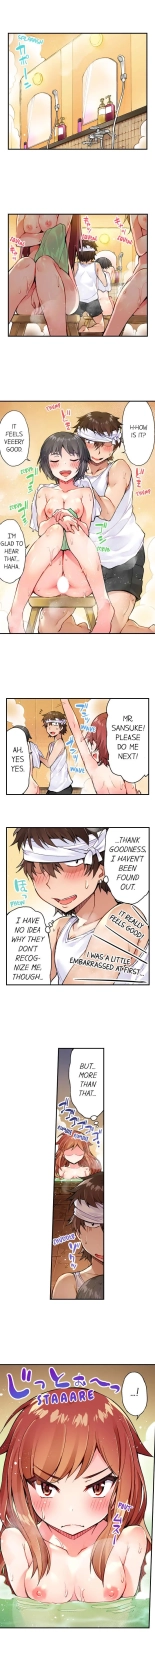 Traditional Job of Washing Girls' Body Ch. 1-181 : page 120